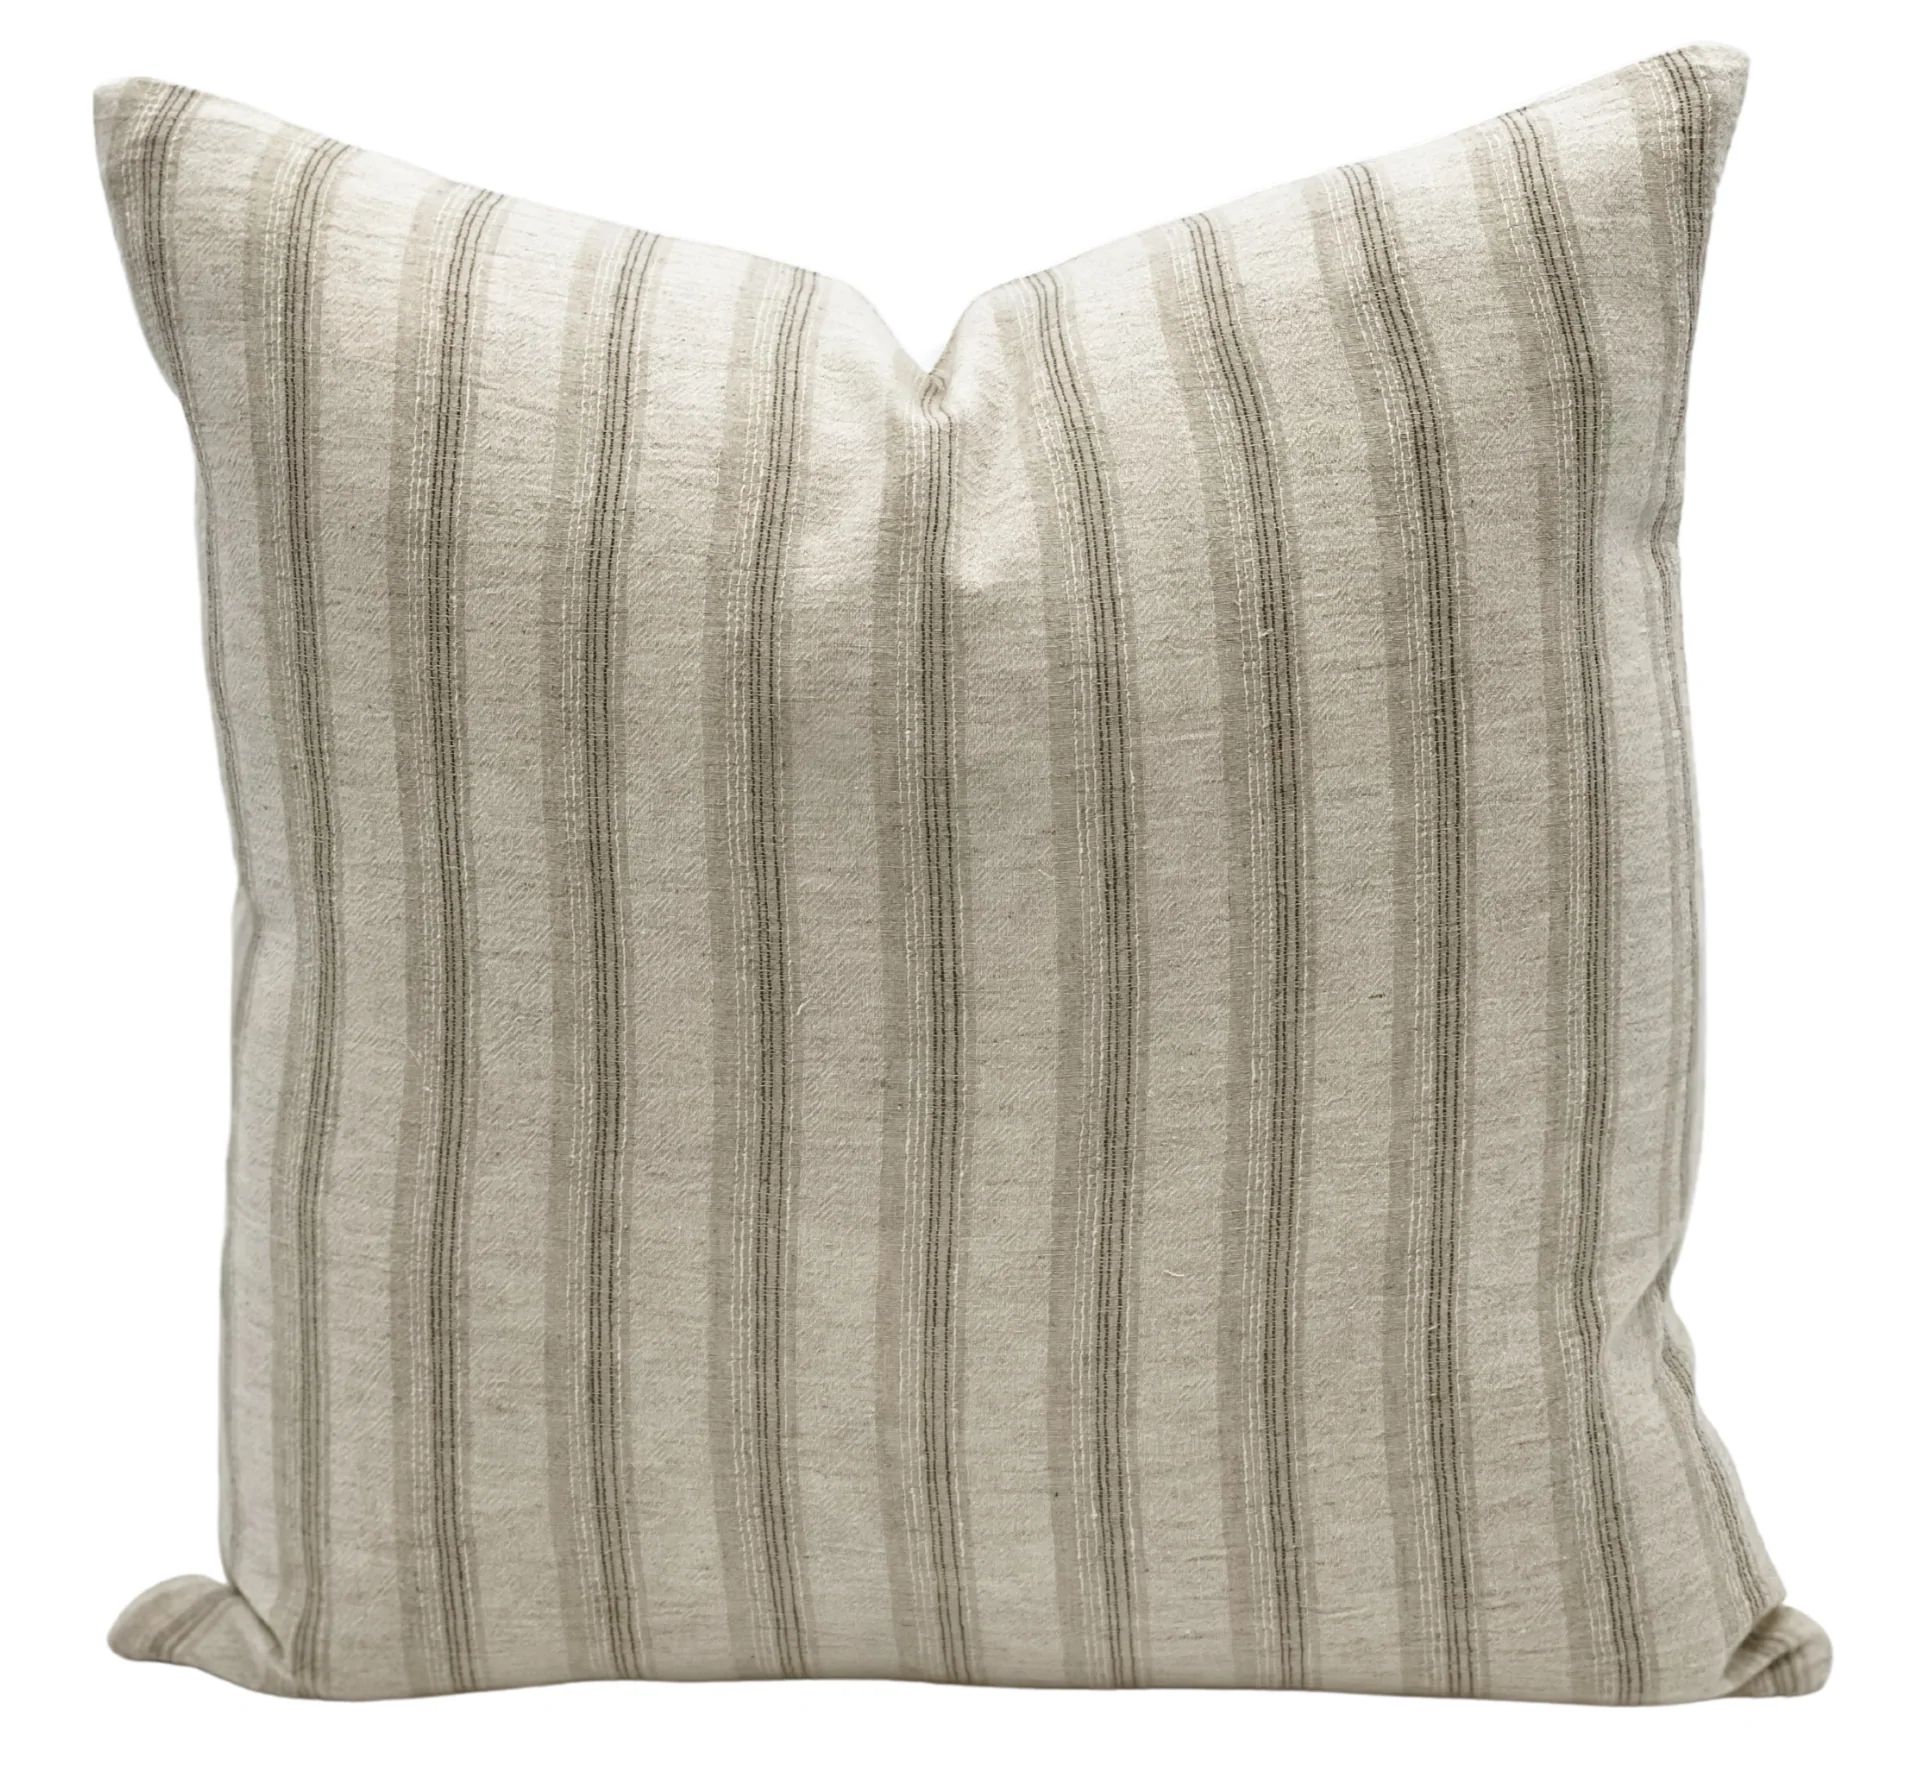 Zoe in Cream and Beige Pillow Cover | Krinto